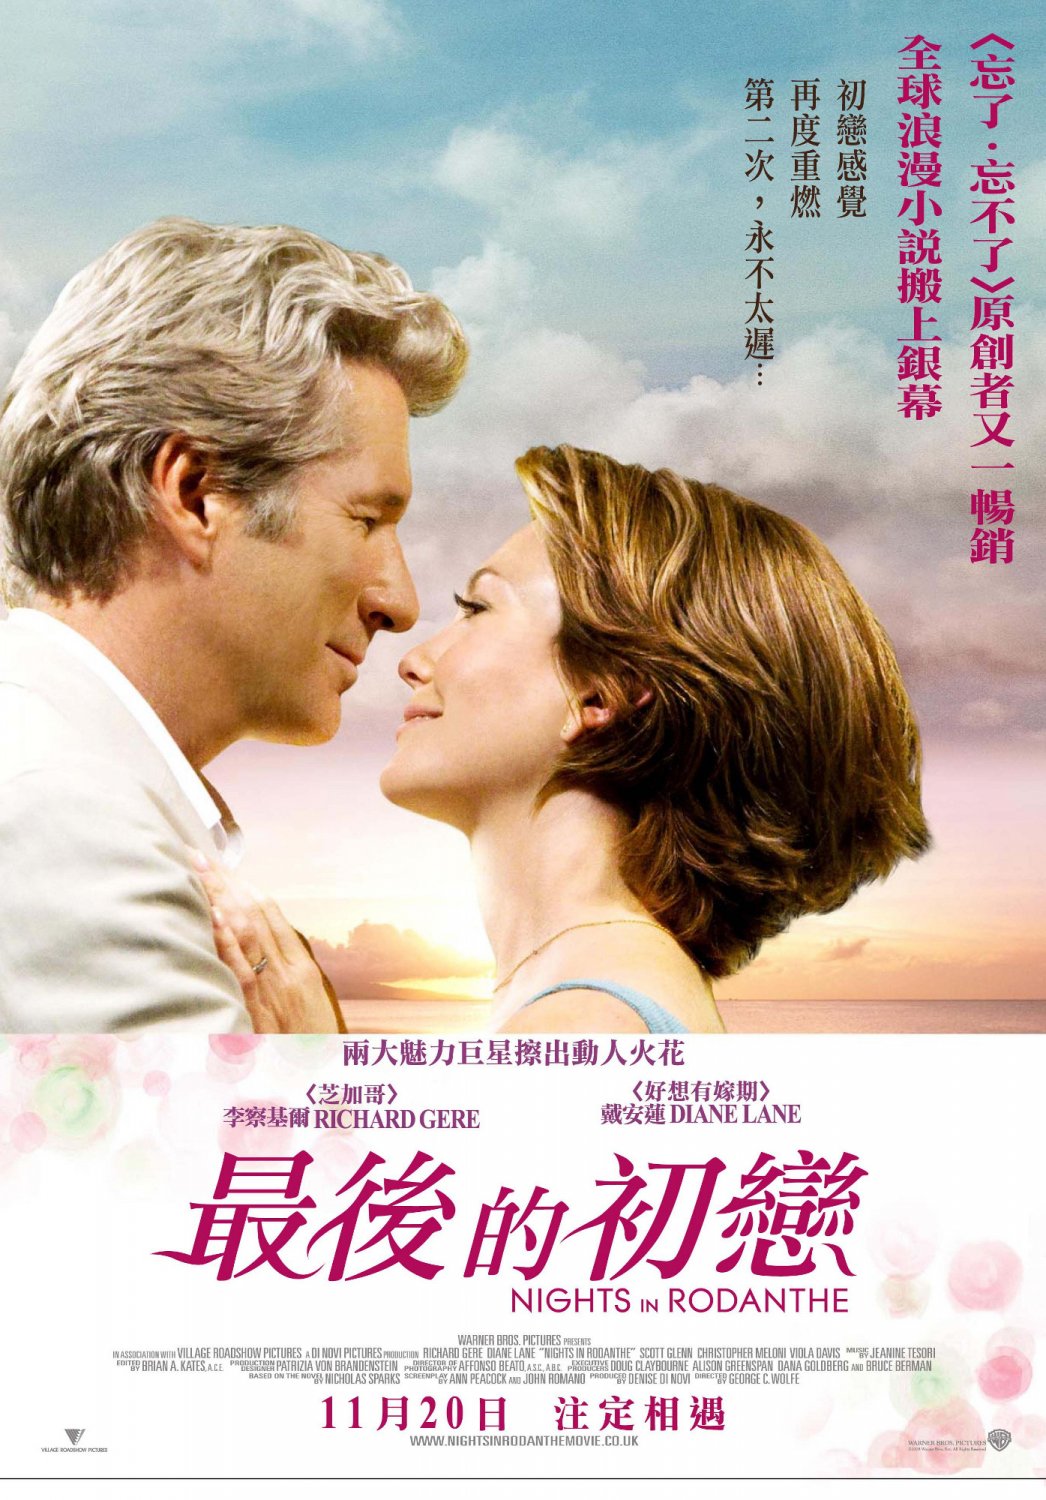 Extra Large Movie Poster Image for Nights in Rodanthe (#3 of 3)